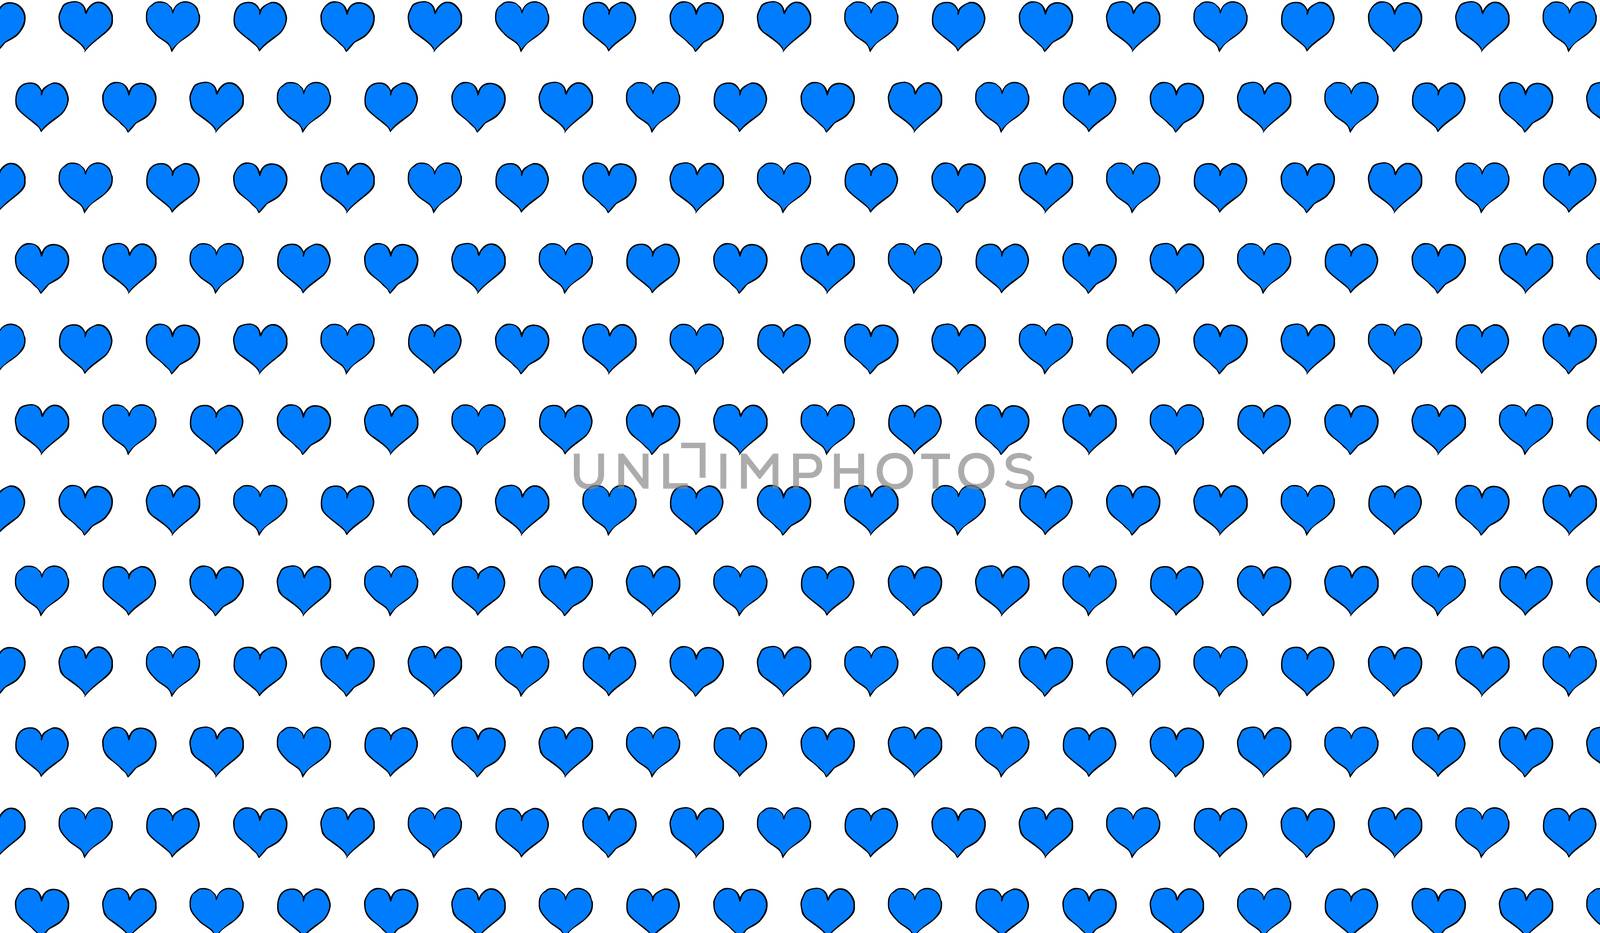 2d blue pattern of cartoon hearts on isolated background.